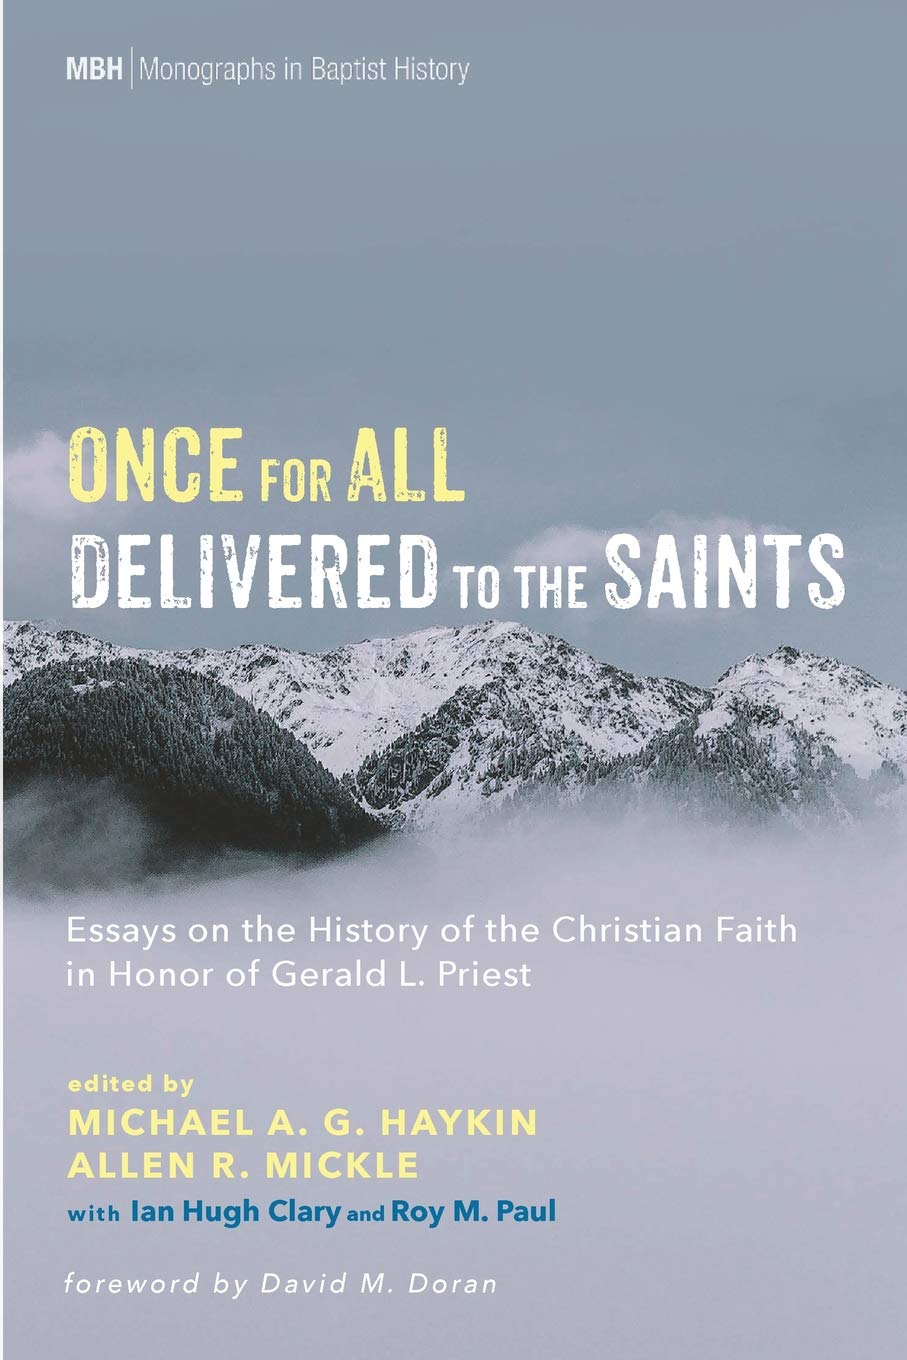 Book Notice: ONCE FOR ALL DELIVERED TO THE SAINTS: ESSAYS ON THE HISTORY OF THE CHRISTIAN FAITH IN HONOR OF GERALD L. PRIEST, edited by Allen Mickle, Michael A. G. Haykin, Ian Clary, Roy Paul